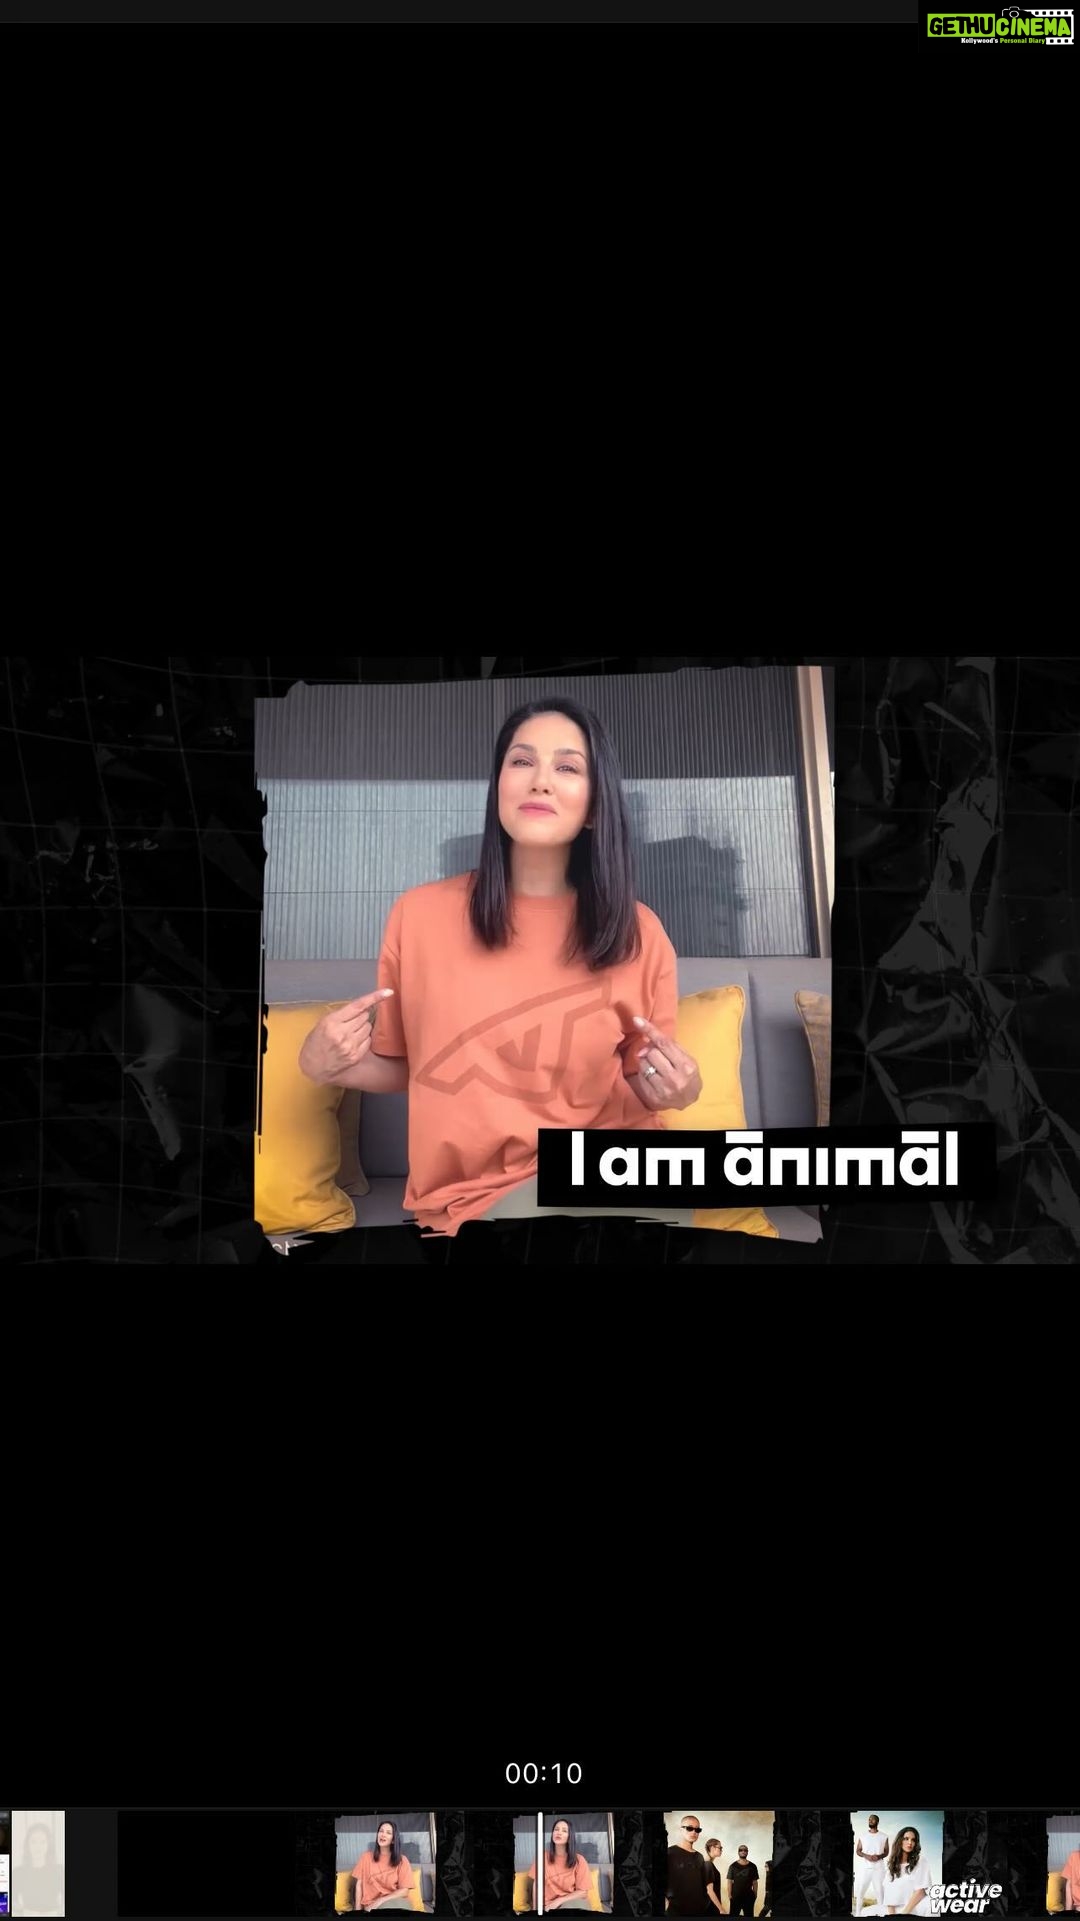 Sunny Leone Instagram - We're thrilled to announce the Launch of “I Am  Animal” on Myntra. Explore a progressive collection of organic and  cruelty-free silhouettes with a fresh approach to athleisure and